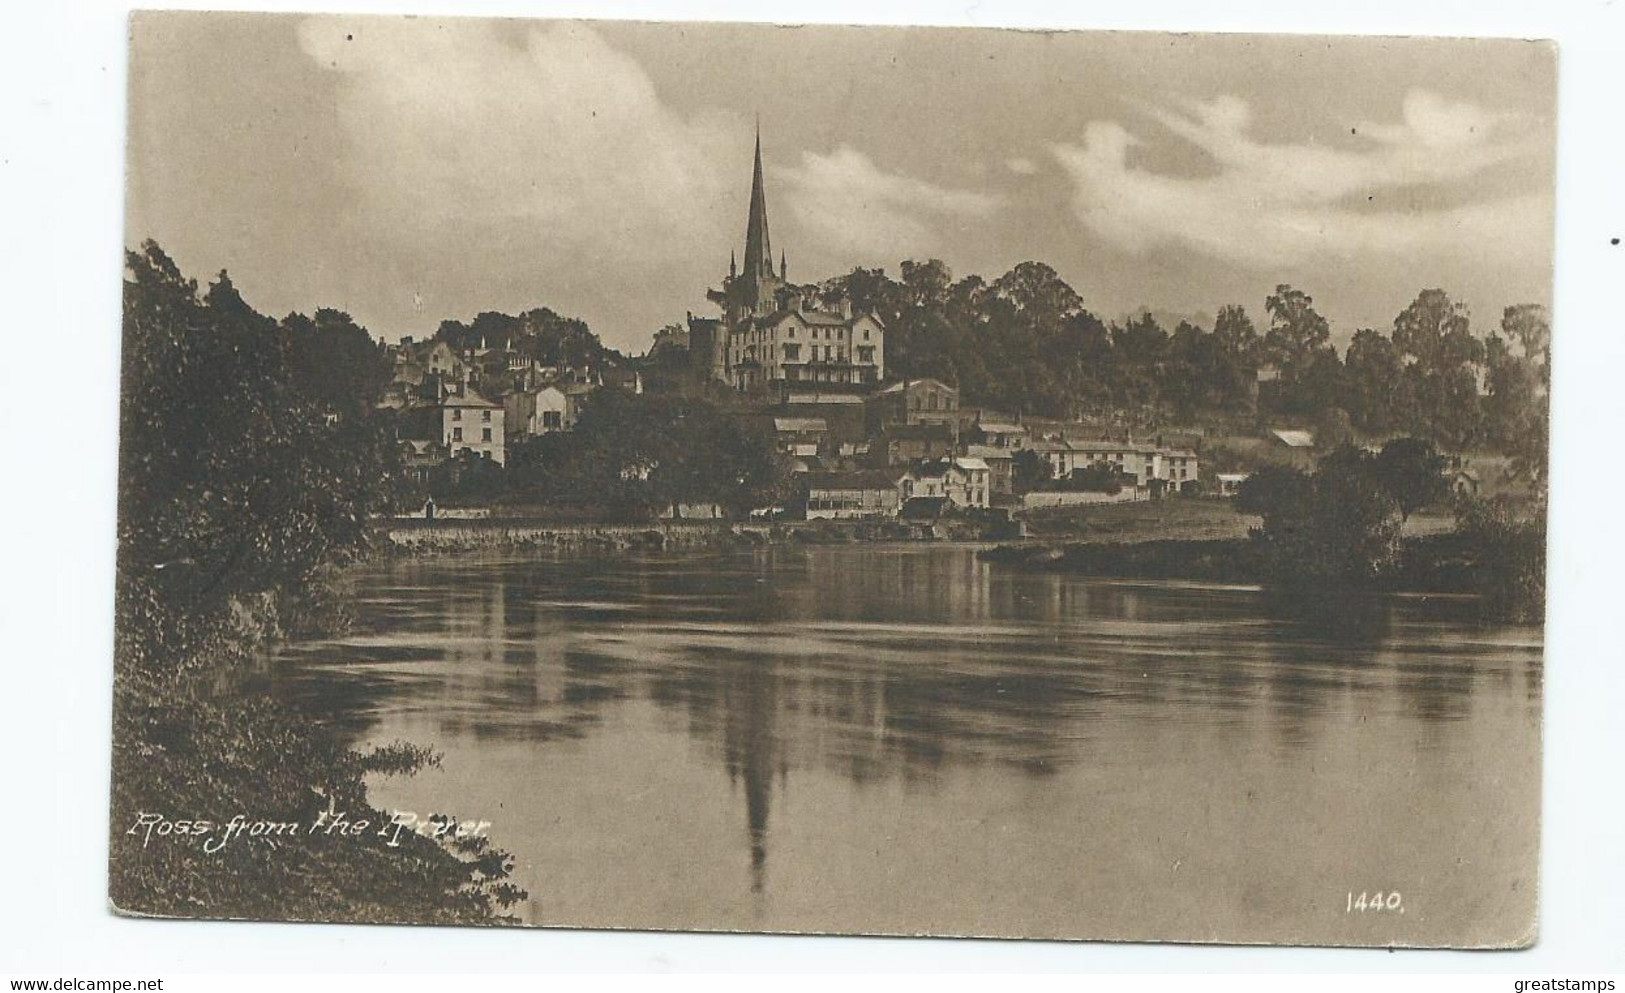 Scotland Postcard Ross From The River Unused - Ross & Cromarty